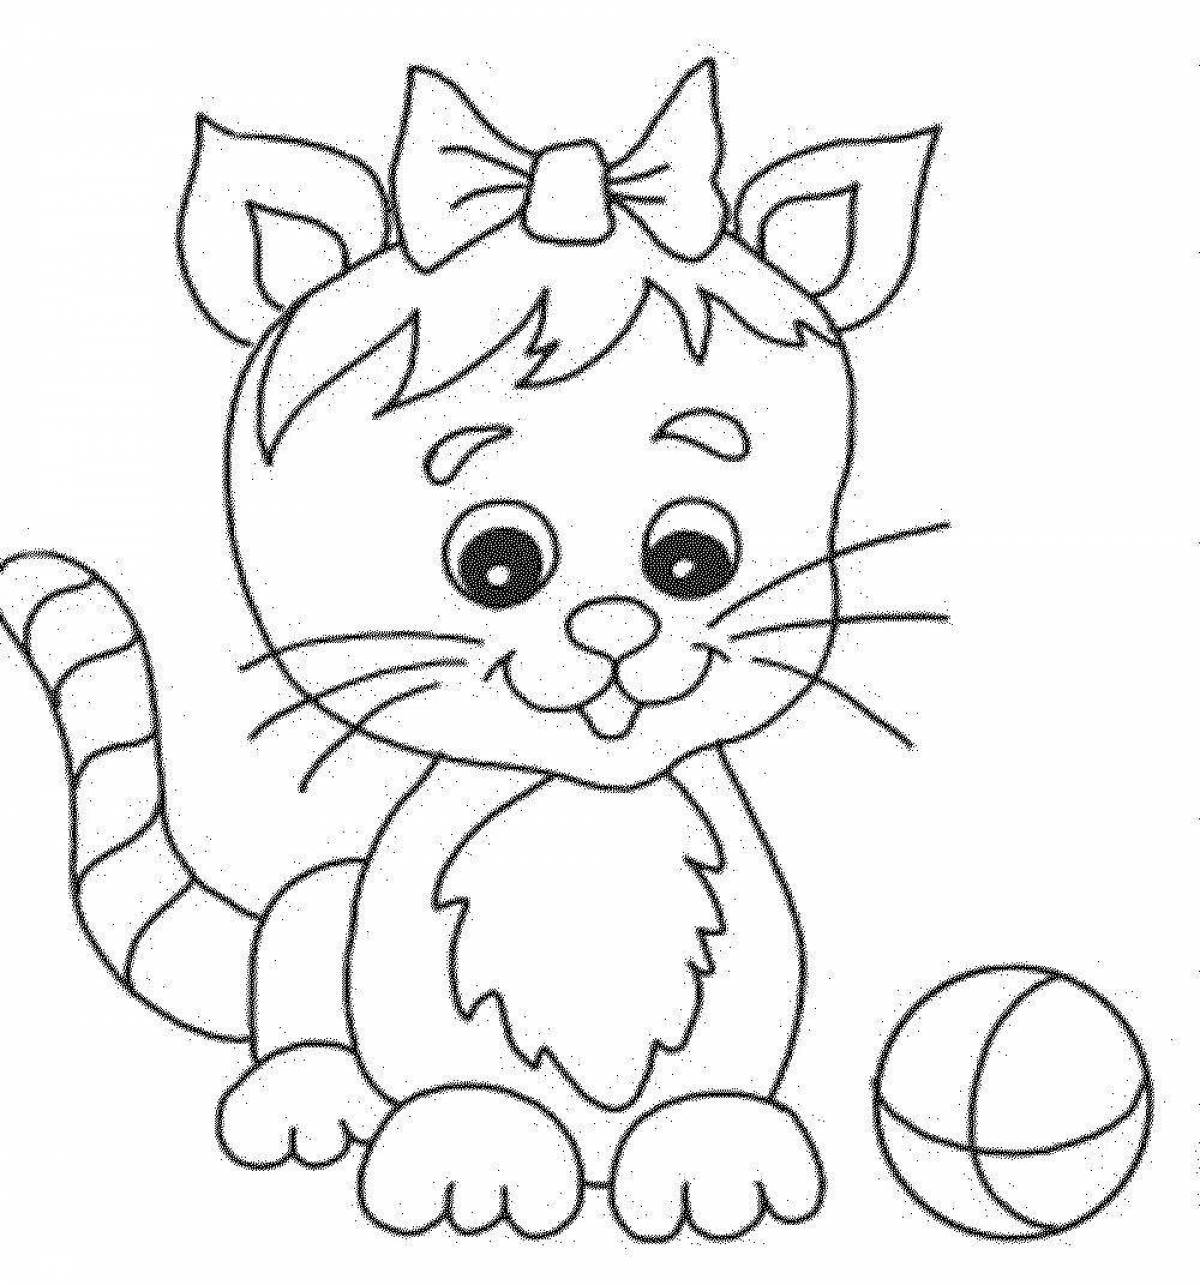 Adorable cat coloring book